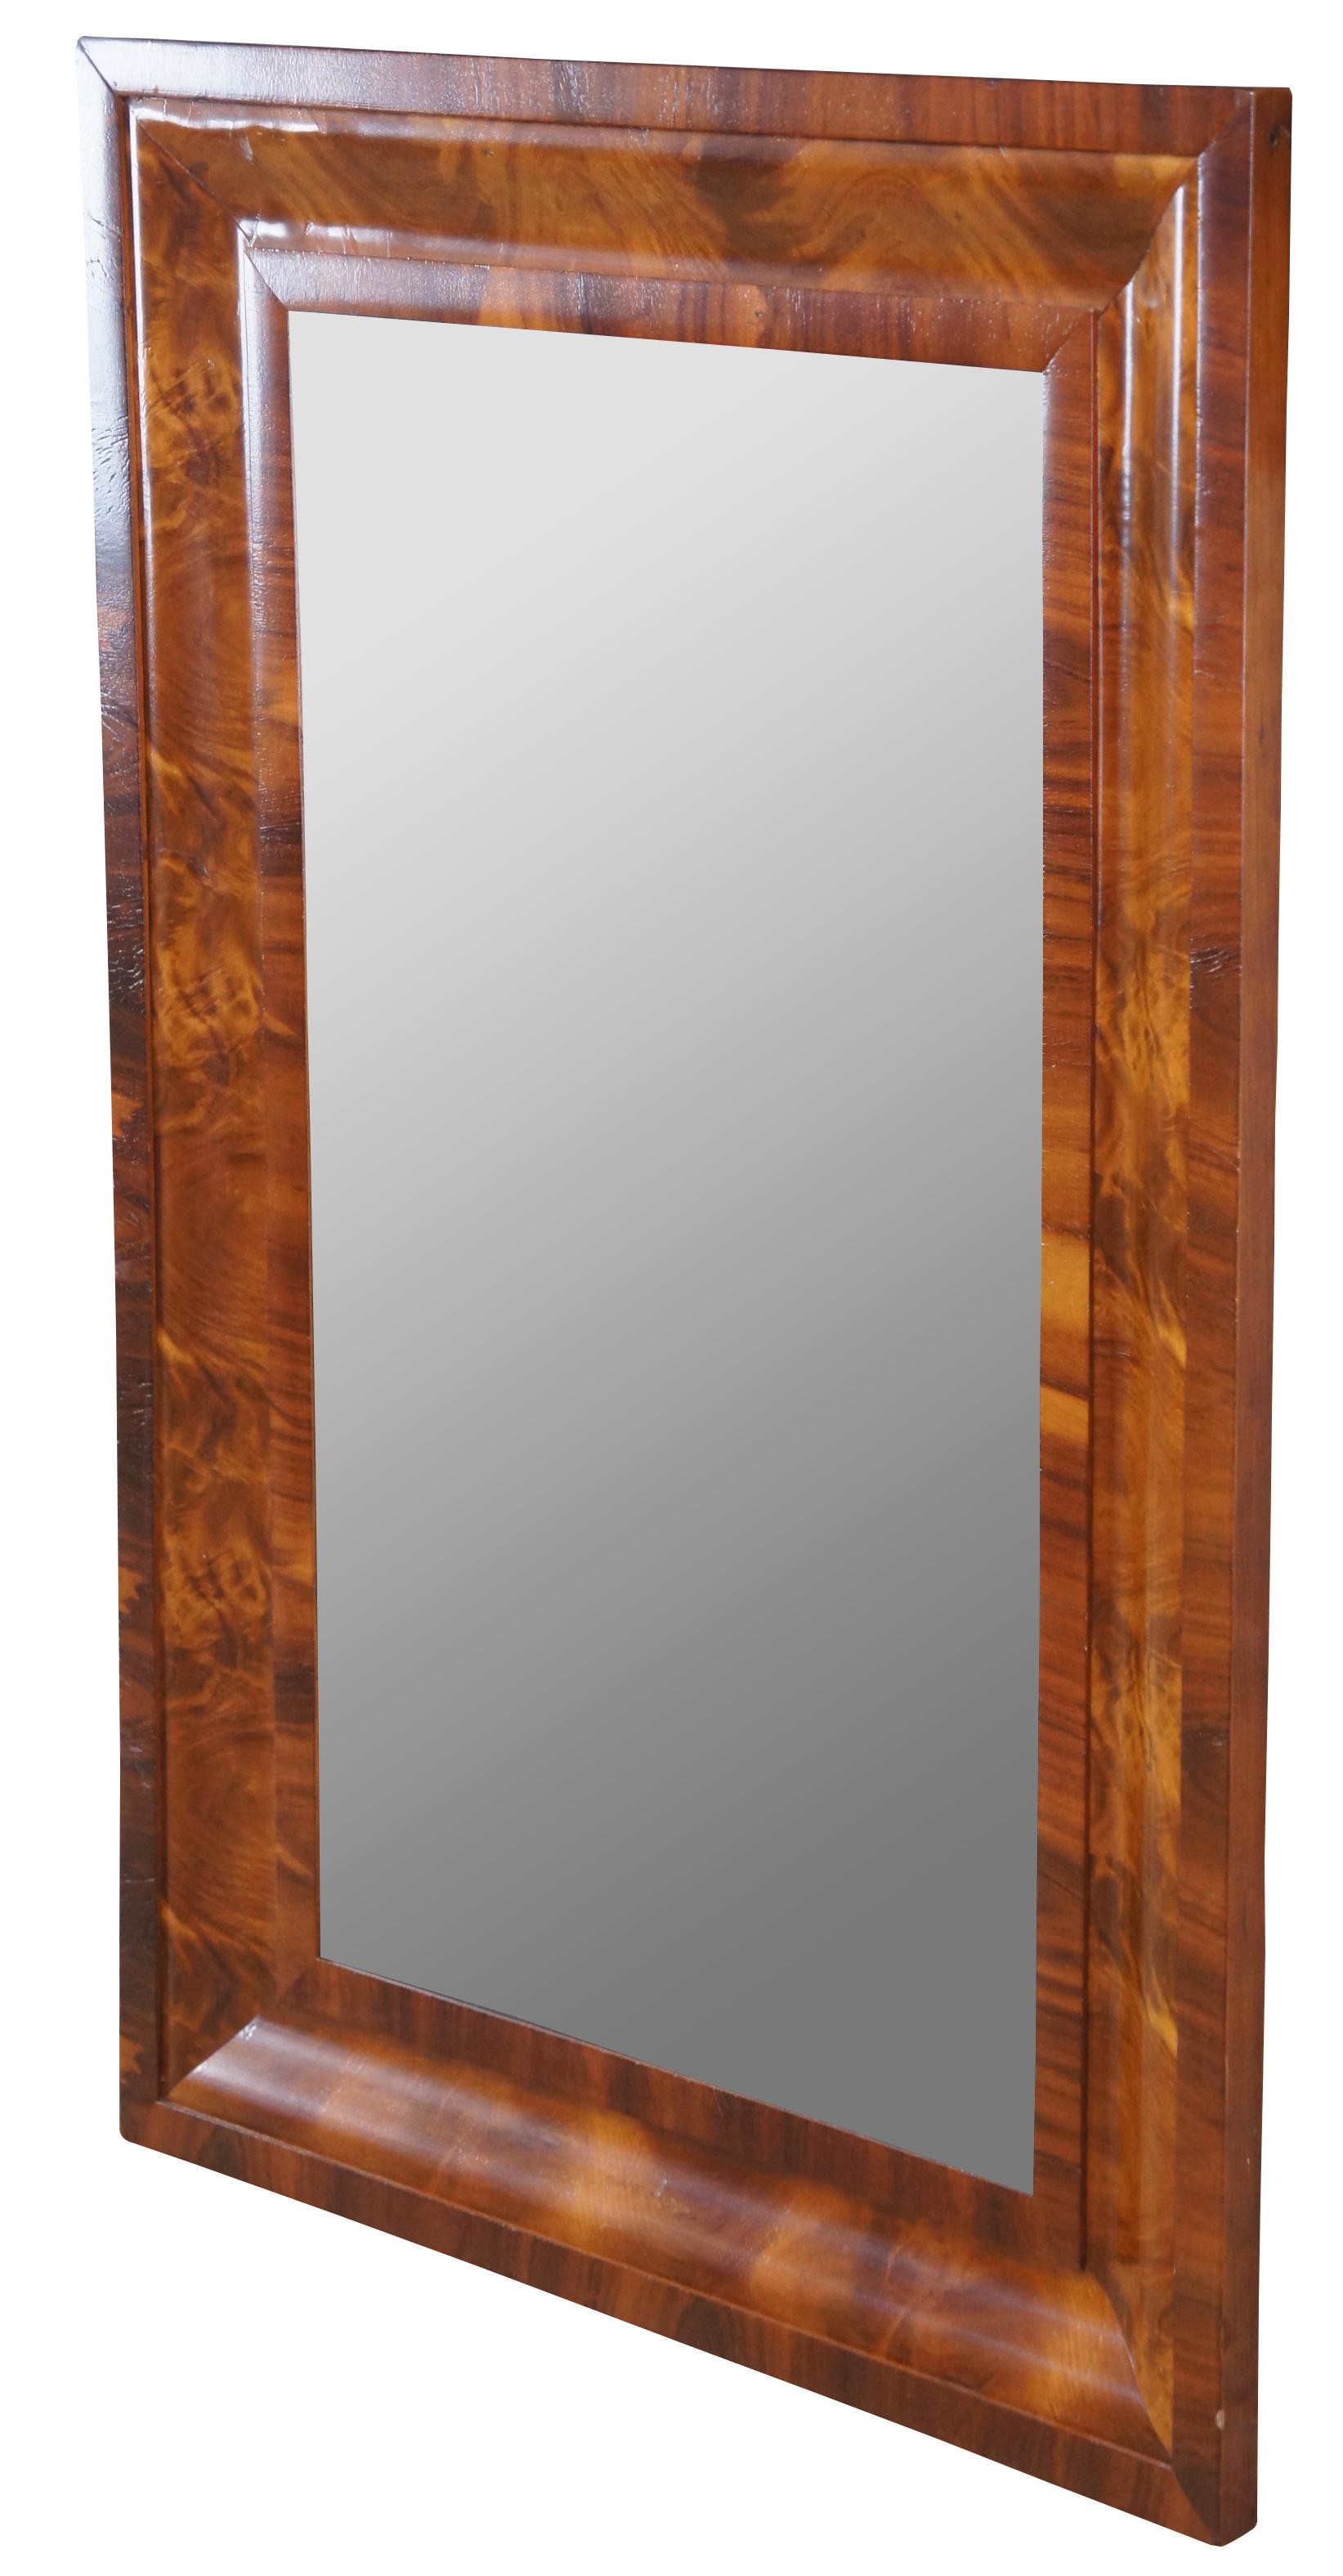 An American Empire mirror, circa 1860s. Features rectangular plate set within an ogee flame mahogany veneered frame. The mirror can be hung vertically or horizontally. Measure: 38